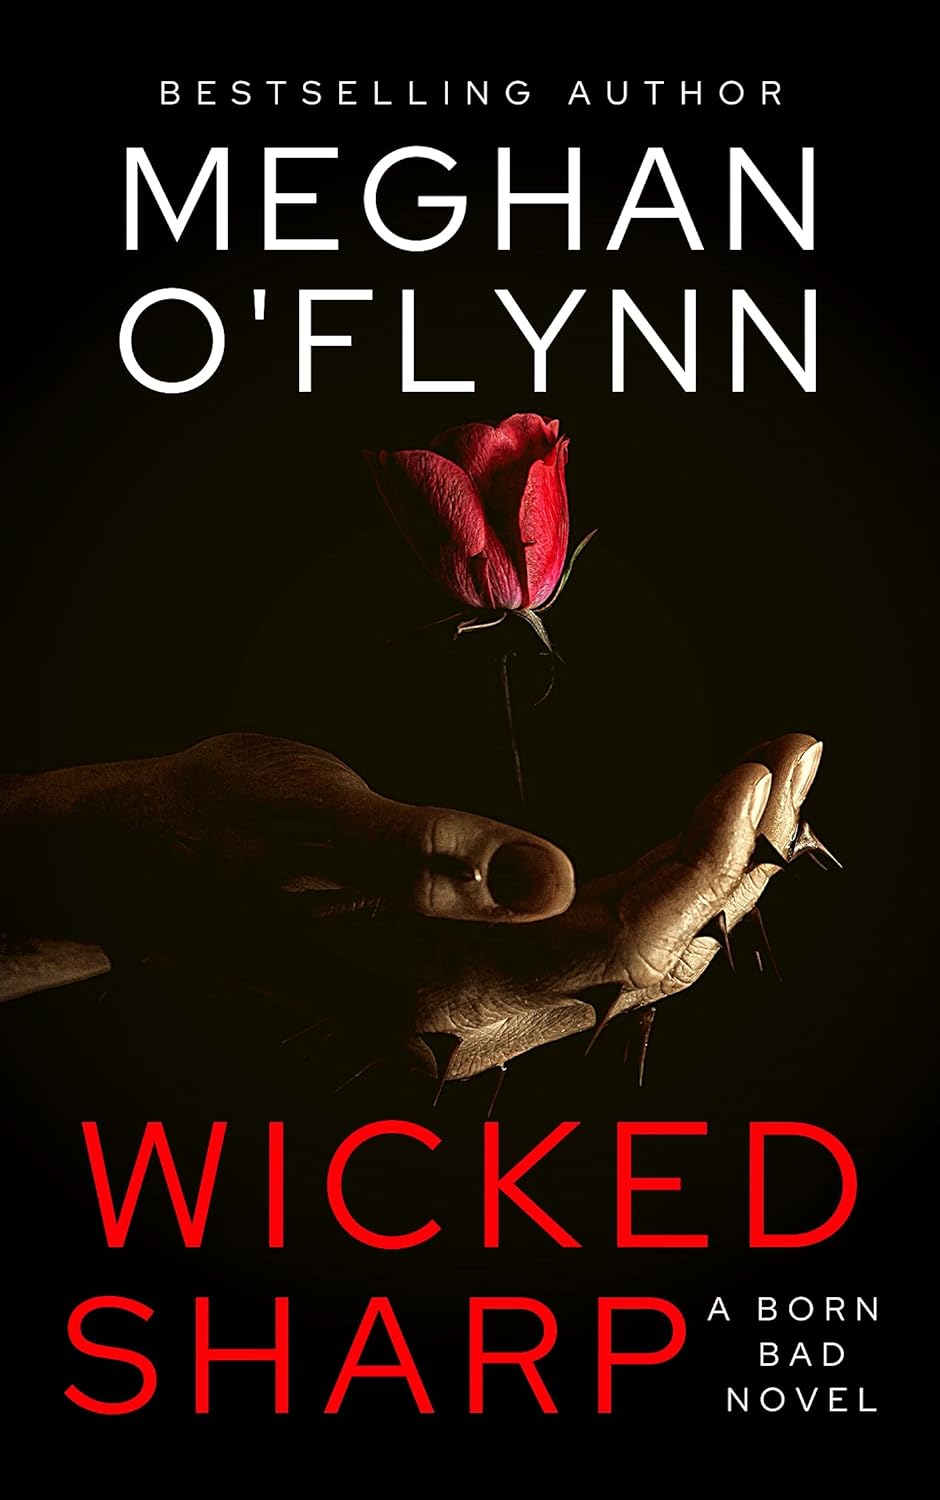 Wicked Sharp A Serial Killers Daughter Thriller by Bestselling Author Meghan O’Flynn